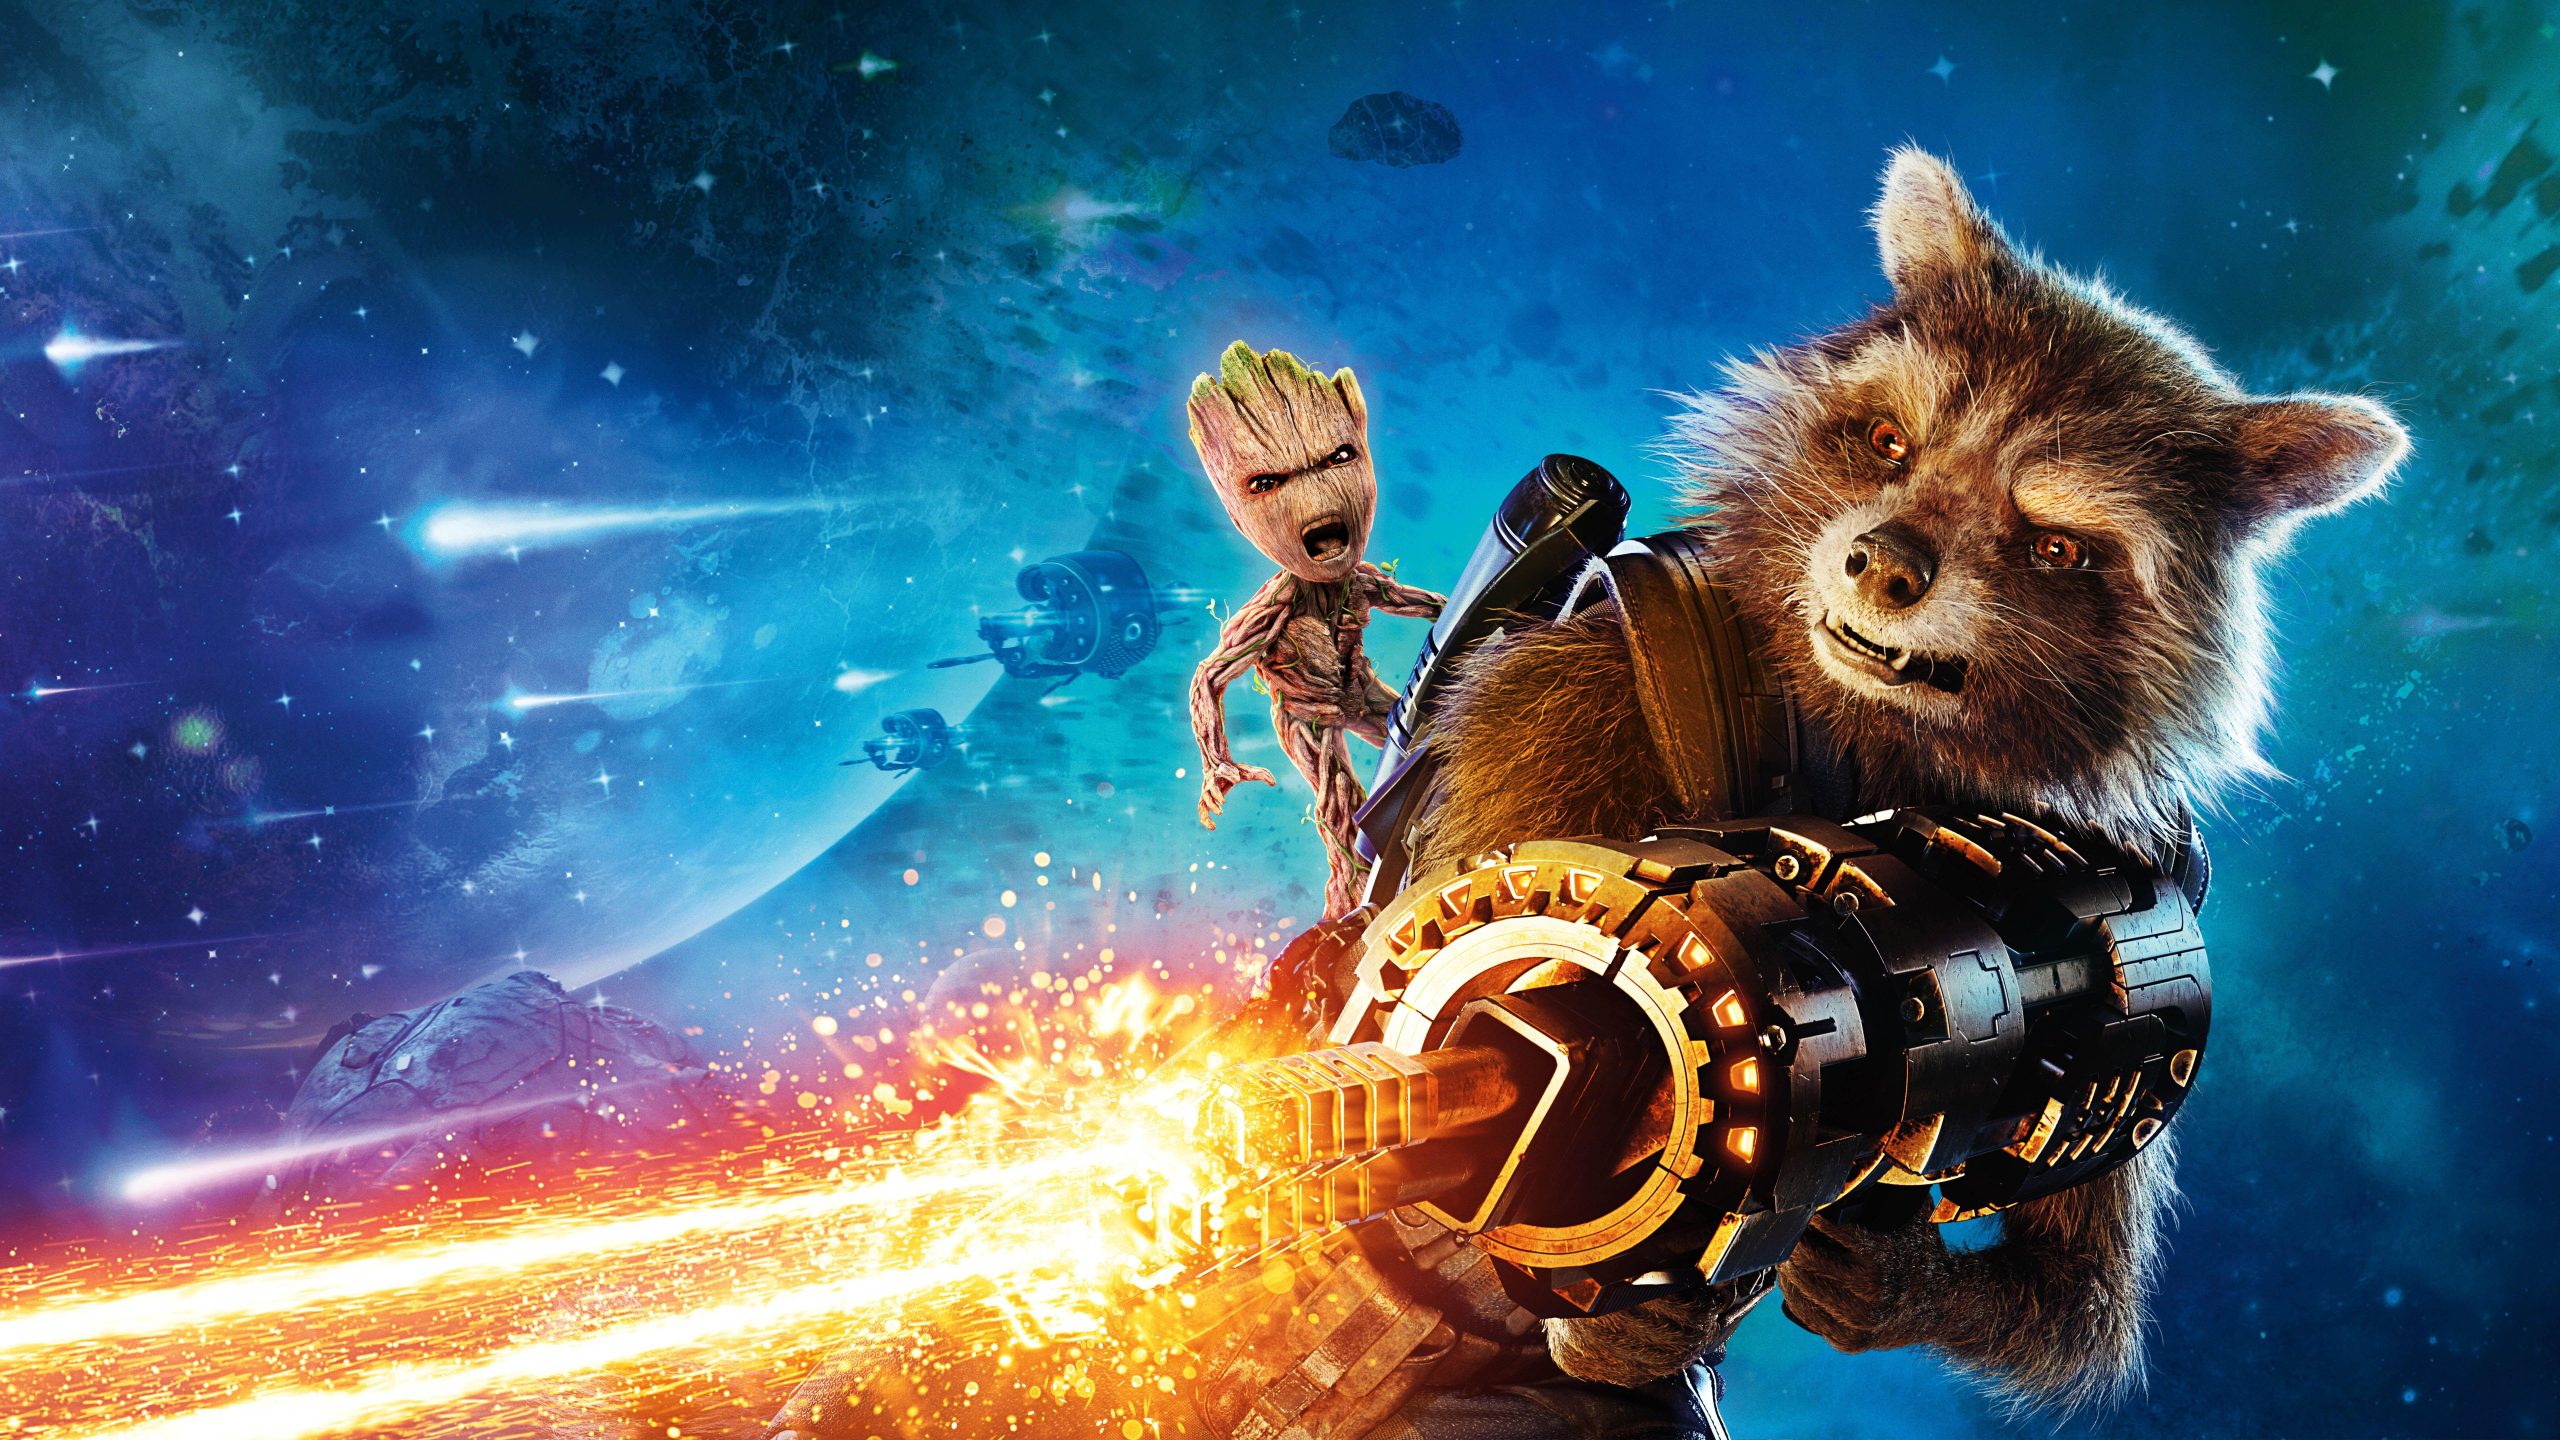 The Guardians Of The Galaxy 4k Wallpapers For Free, The Guardians Of The Galaxy 4k, Movies